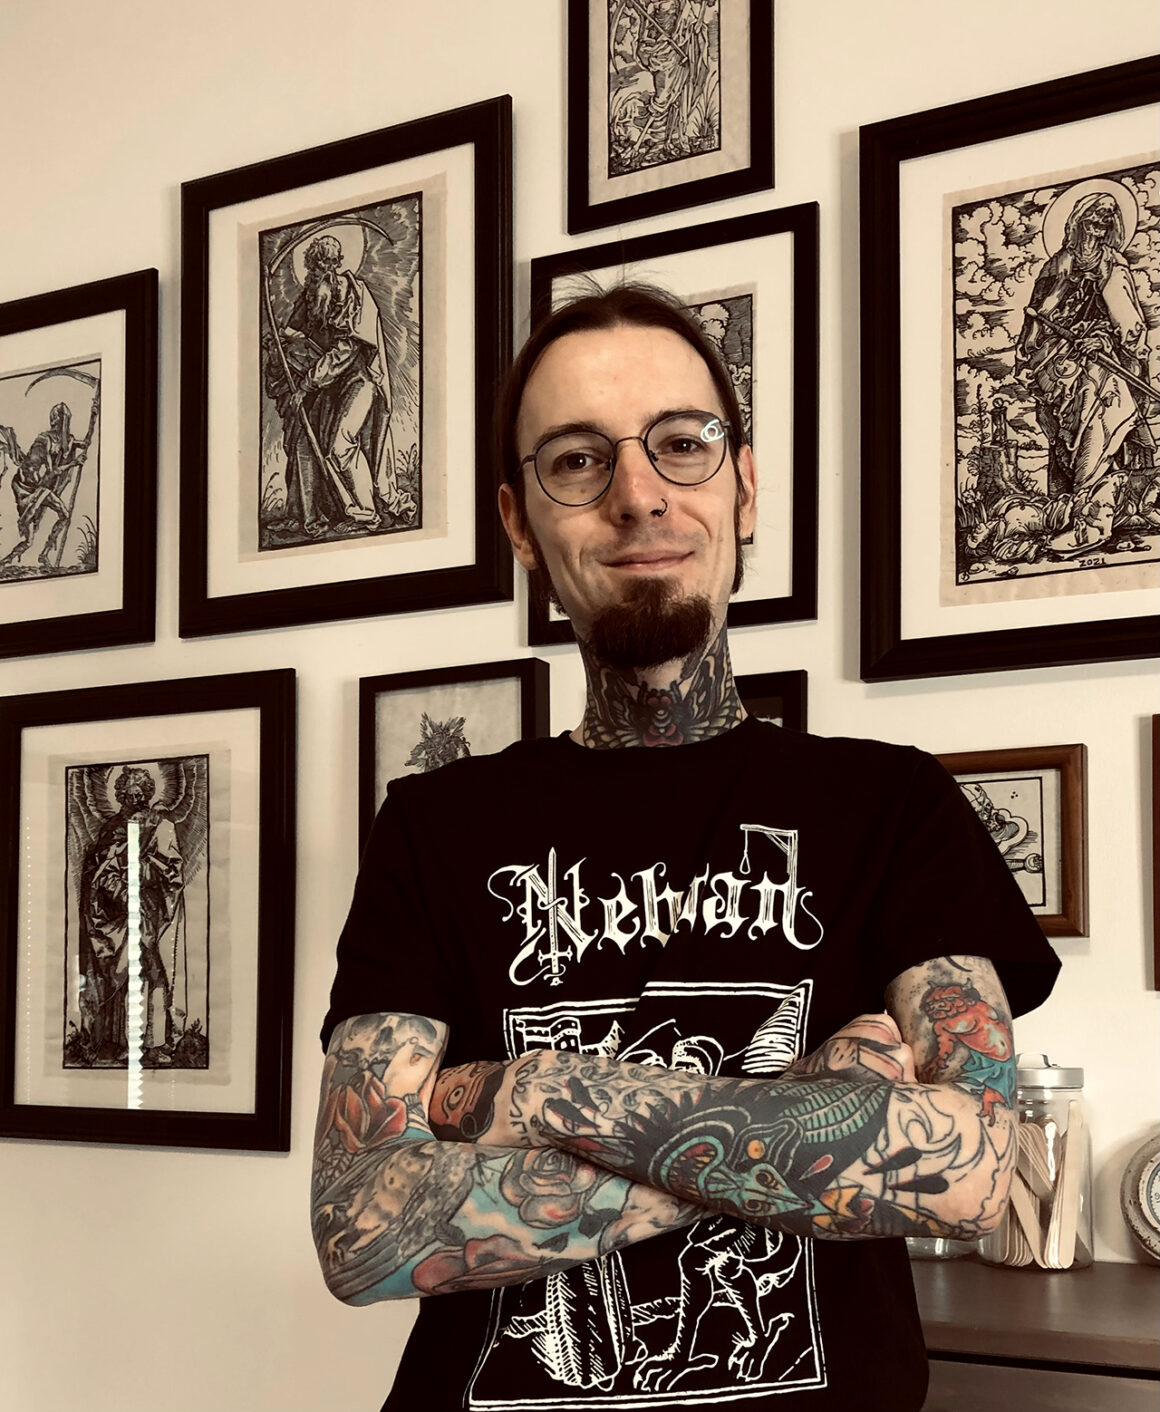 Tattoo artists are covering up racist and hateful tattoos for free